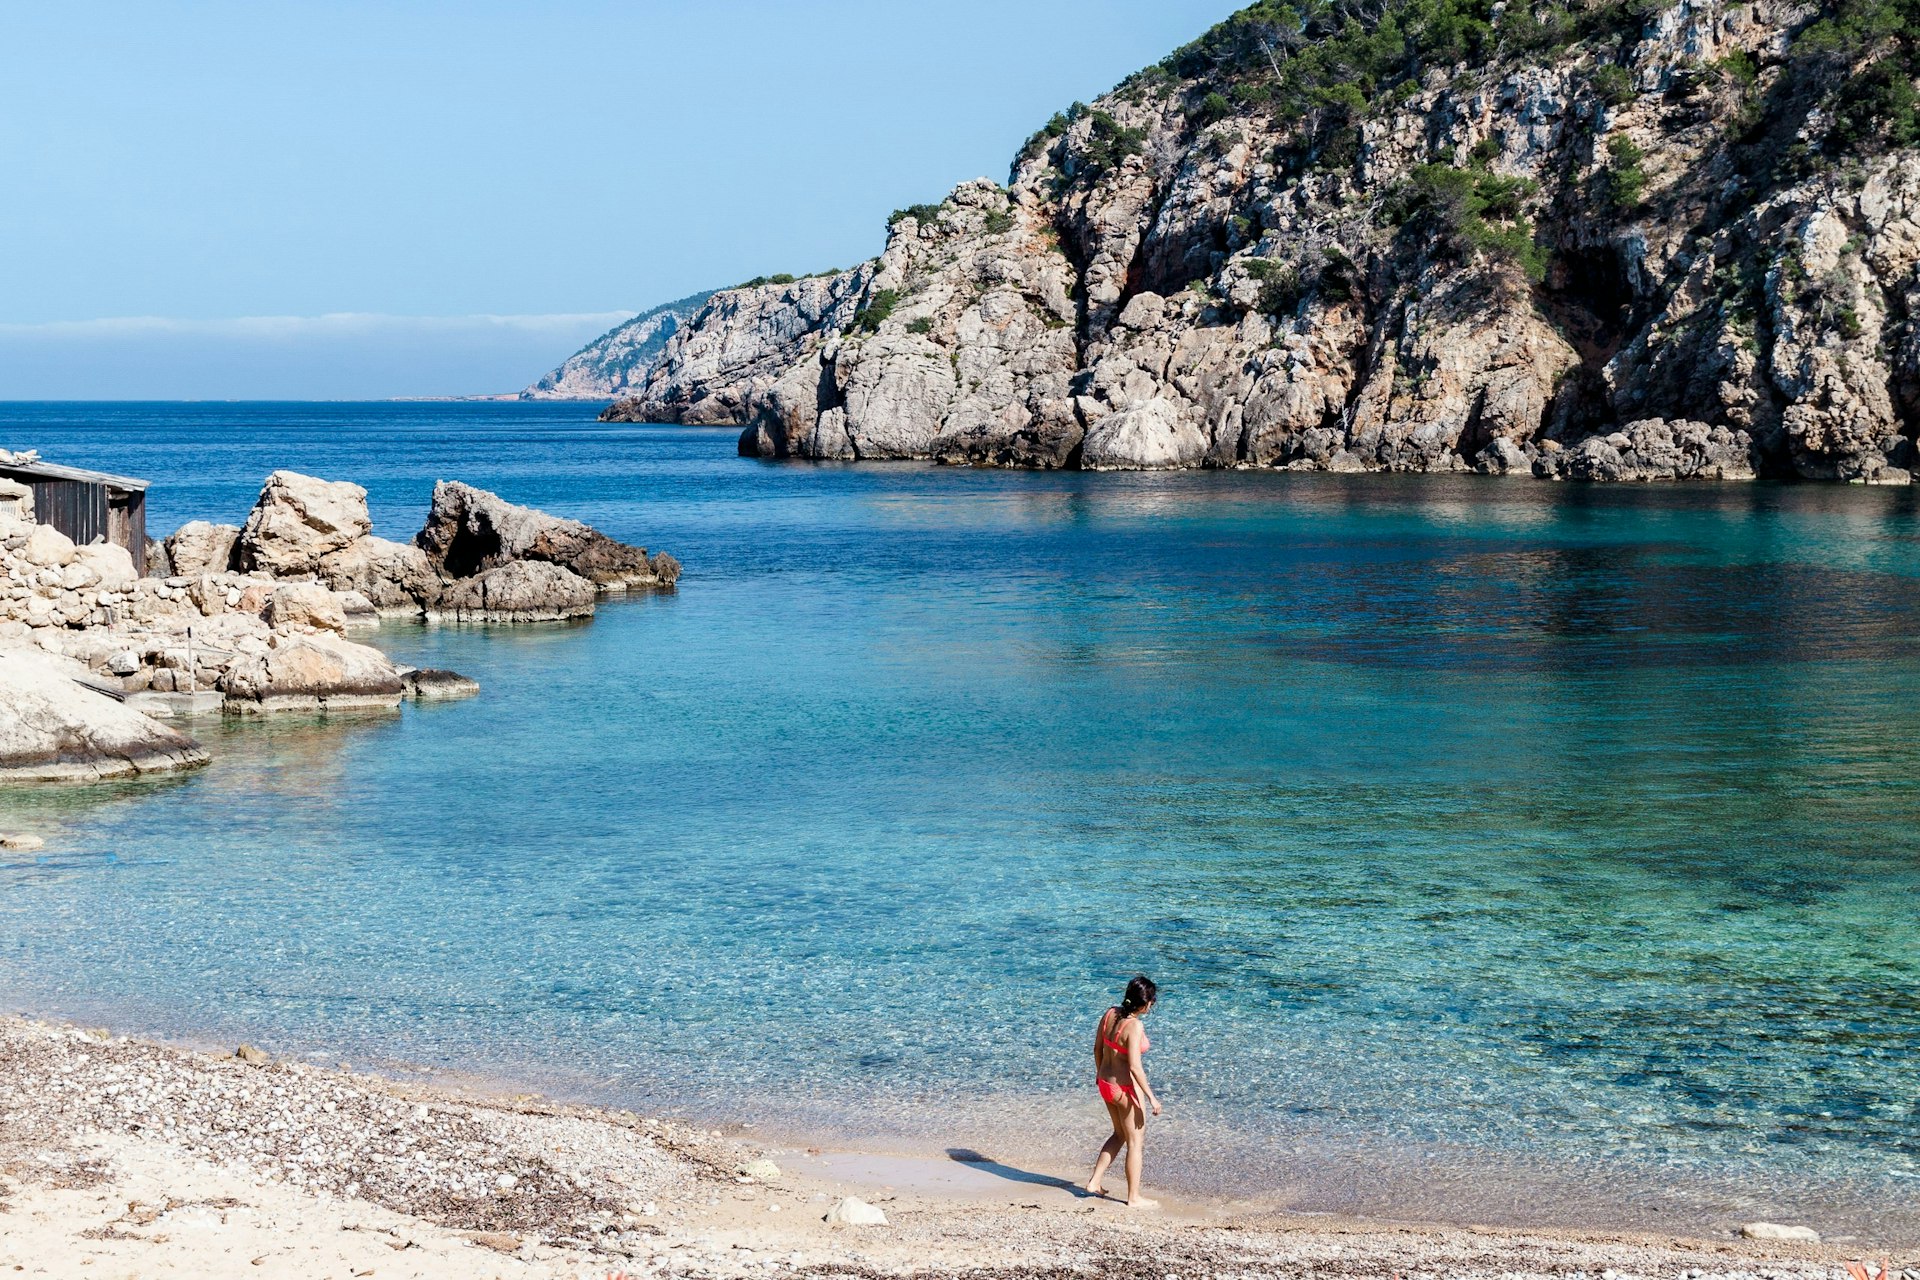 A woman checks the water at the secluded Cala d’en Serra beach on Ibiza’s northern shore.